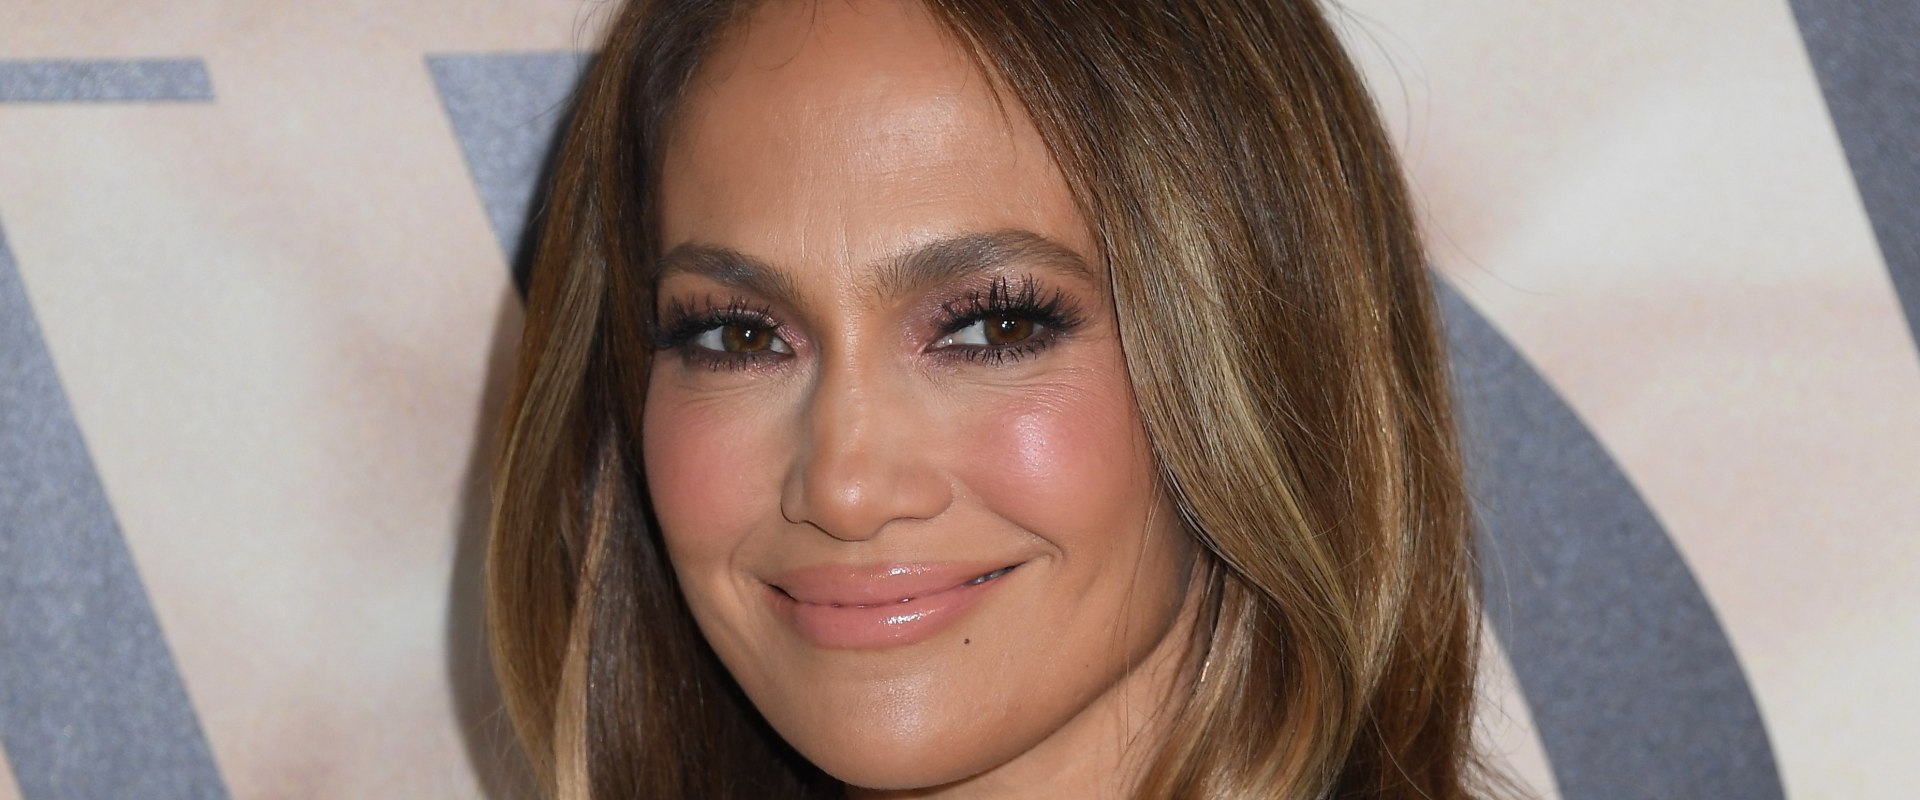 Unlock Your Natural Beauty with Eyelash Extensions Just Like Jennifer Lopez